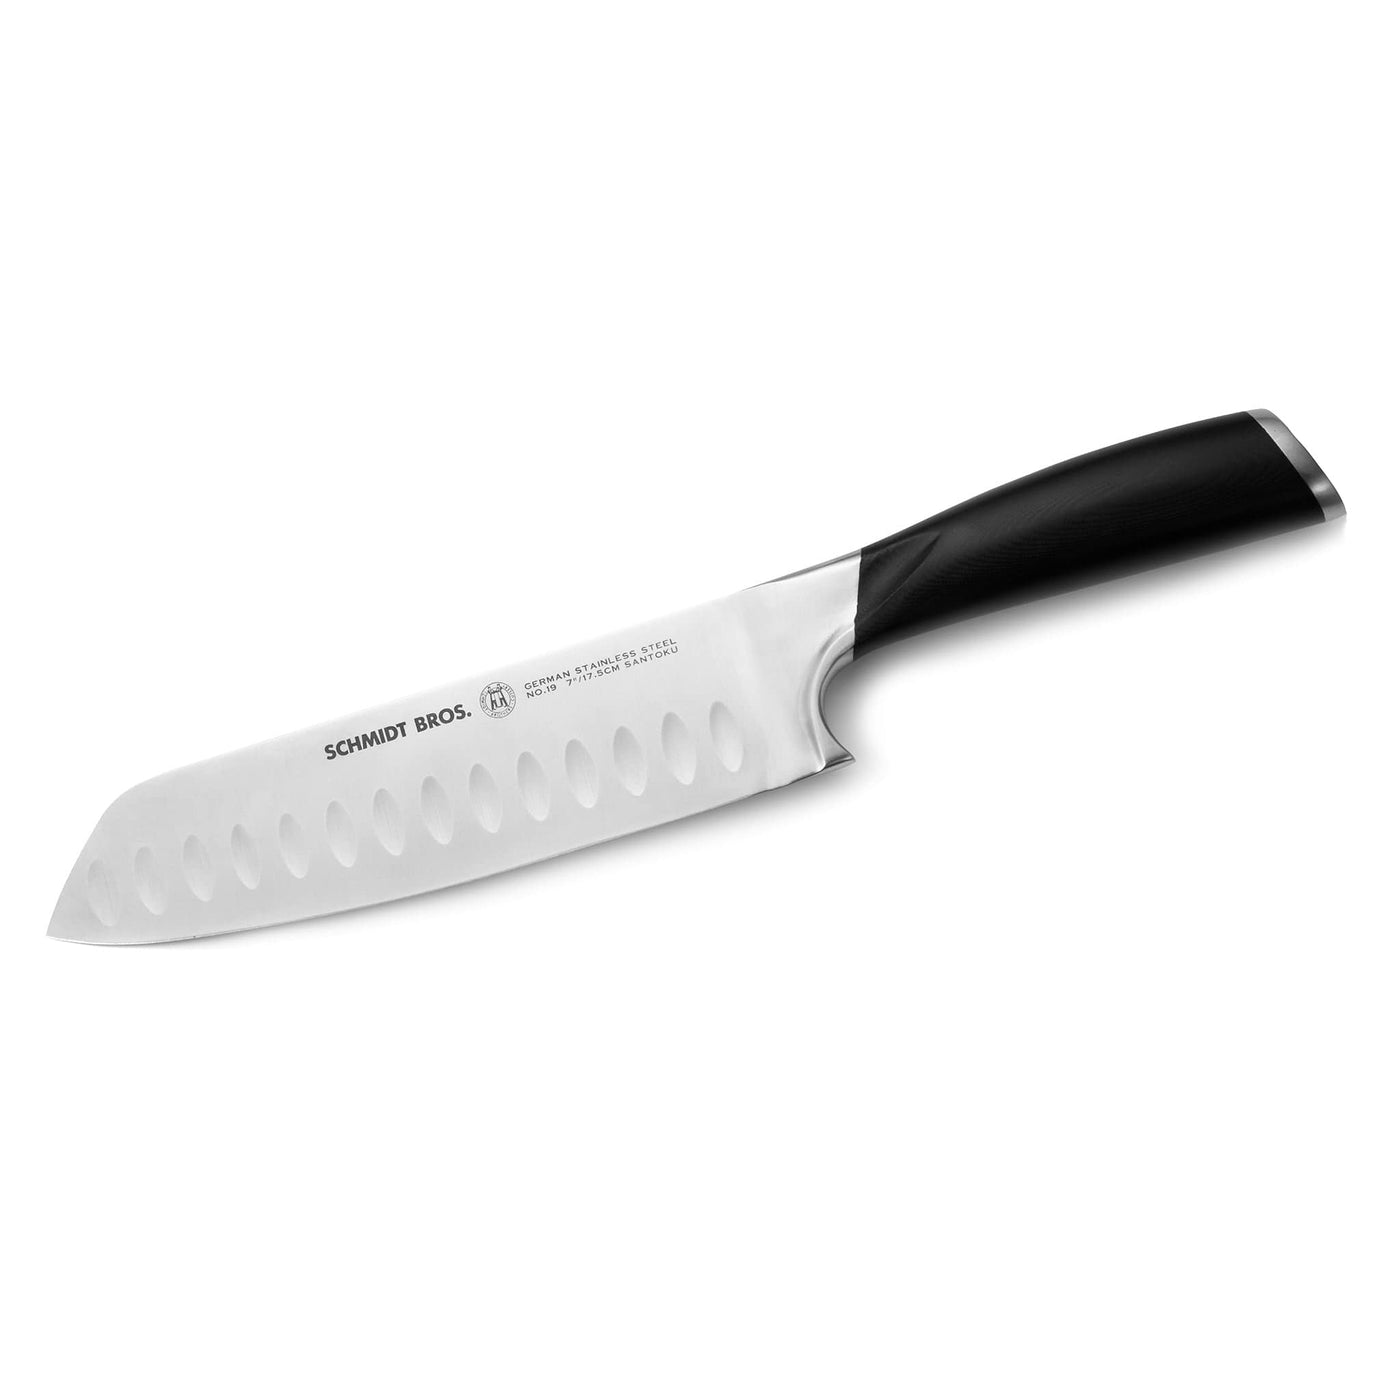 Schmidt Brothers Kitchen Cutlery Schmidt Brothers, Heritage Series, 12-Piece Knife Set, High-Carbon Stainless Steel Cutlery and Acrylic Magnetic Knife Block